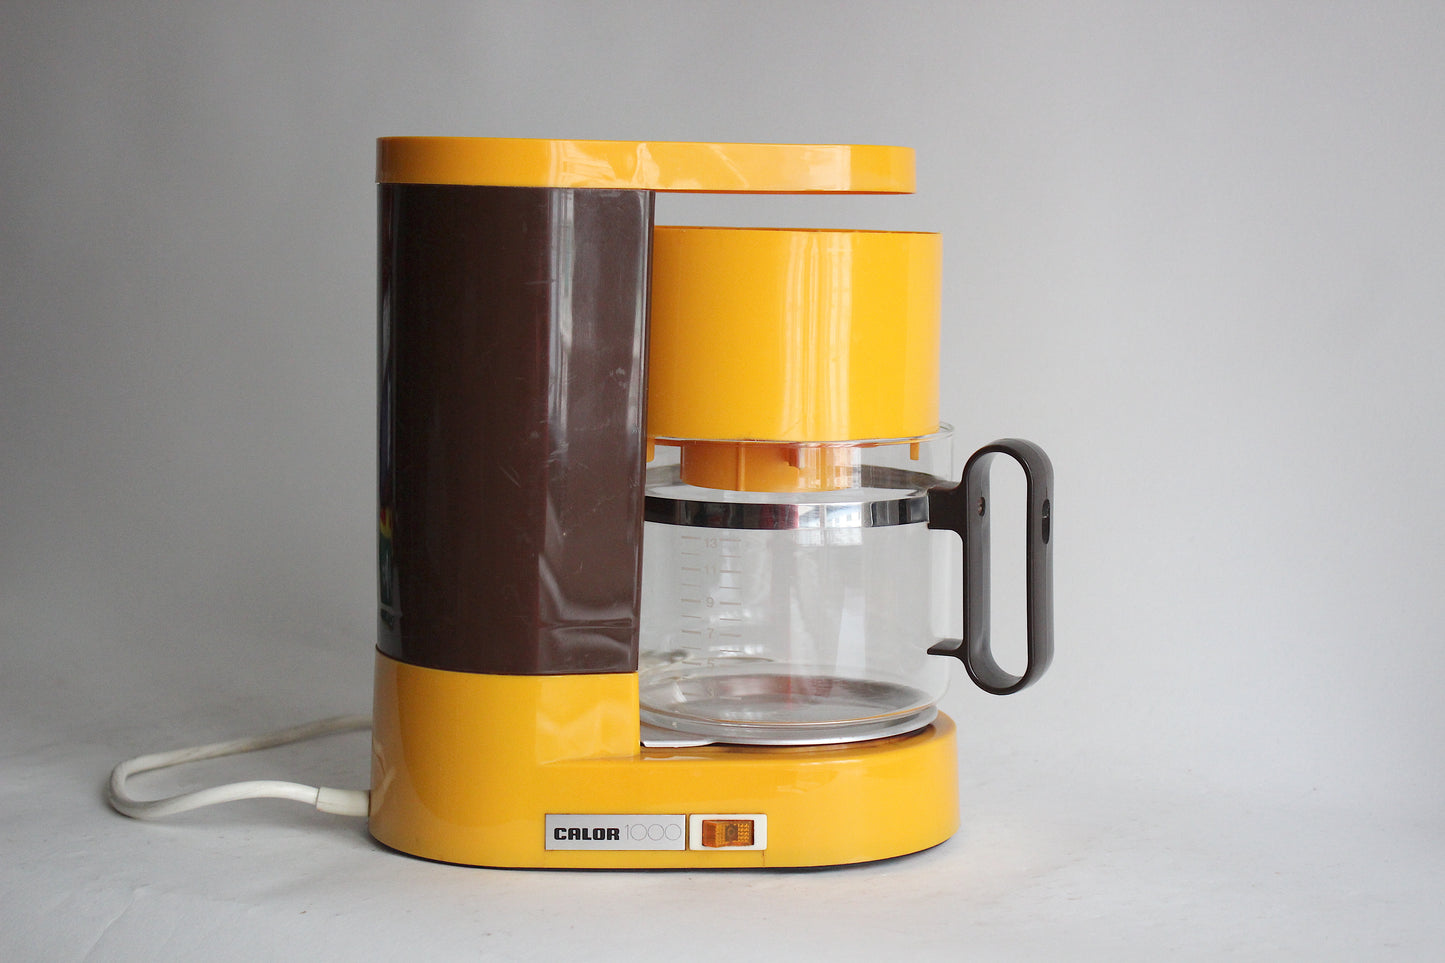 Filter Coffee Maker CALOR 1000 Orange. French 70s Space Age Coffee Maker.